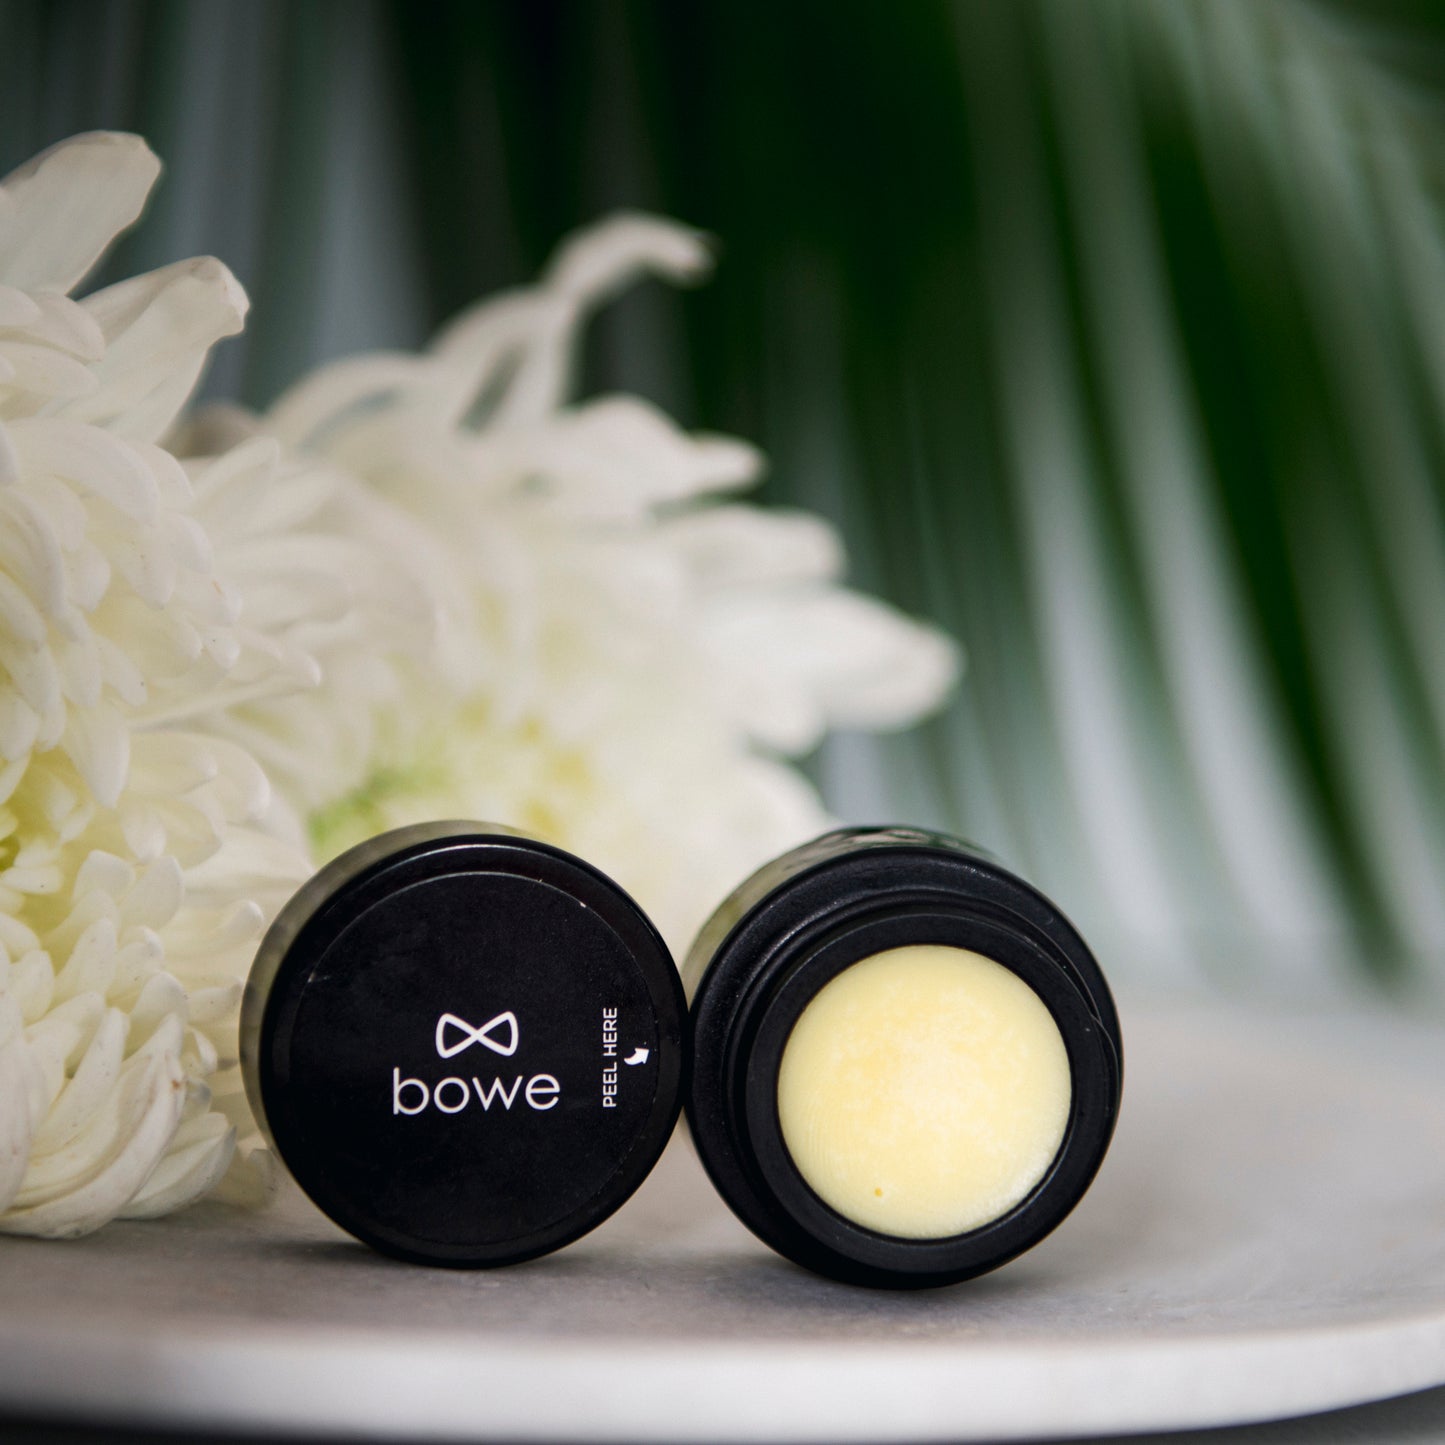 Bowe Organics lip rescue balm photographed with blurred out green leaves and white chrysanthemums in the background.  The pot is open facing towards camera with the lid next to it and showing the bowe organics name and logo